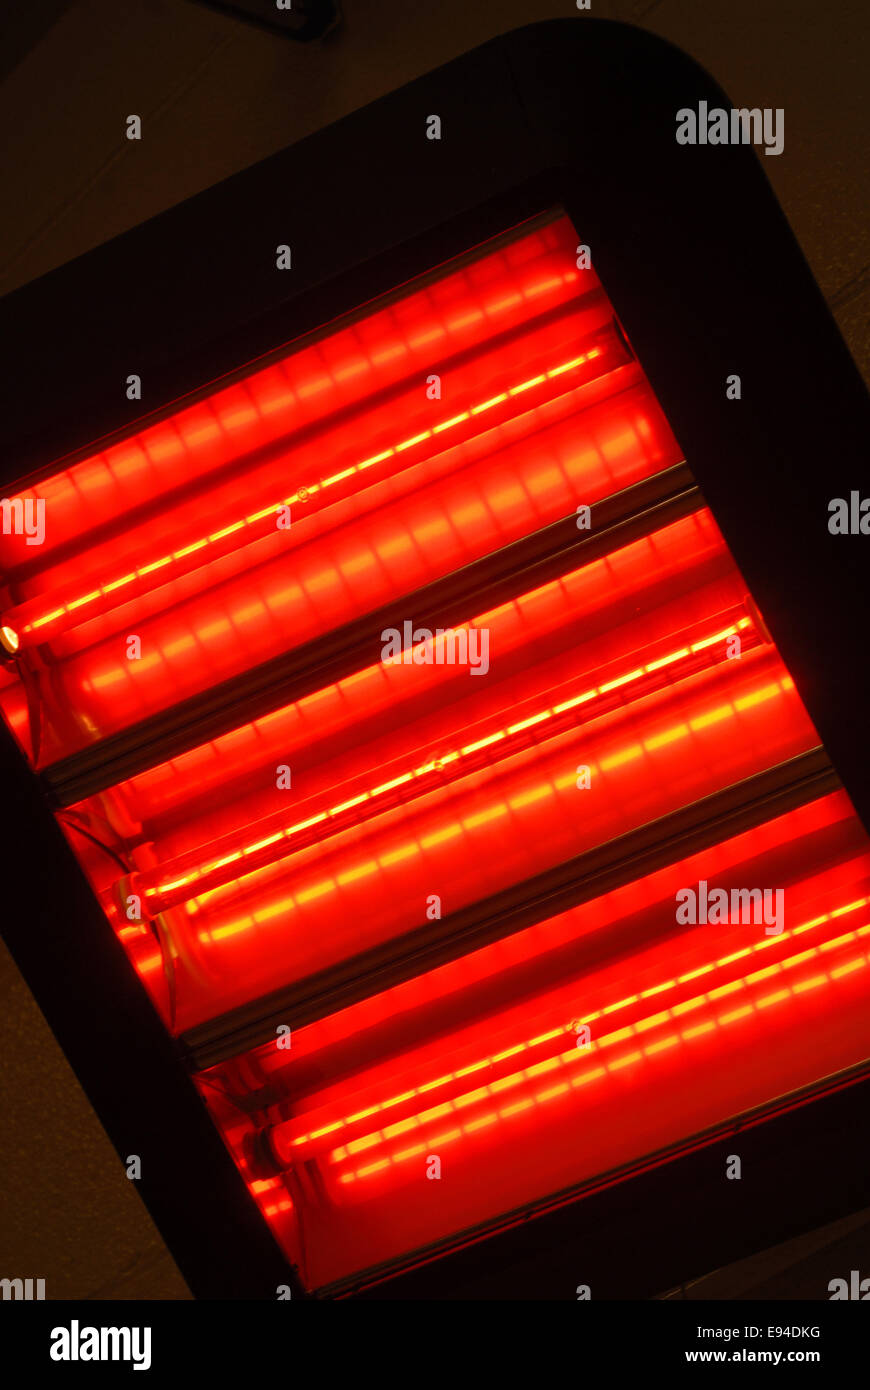 glowing electric fire / electric heater Stock Photo